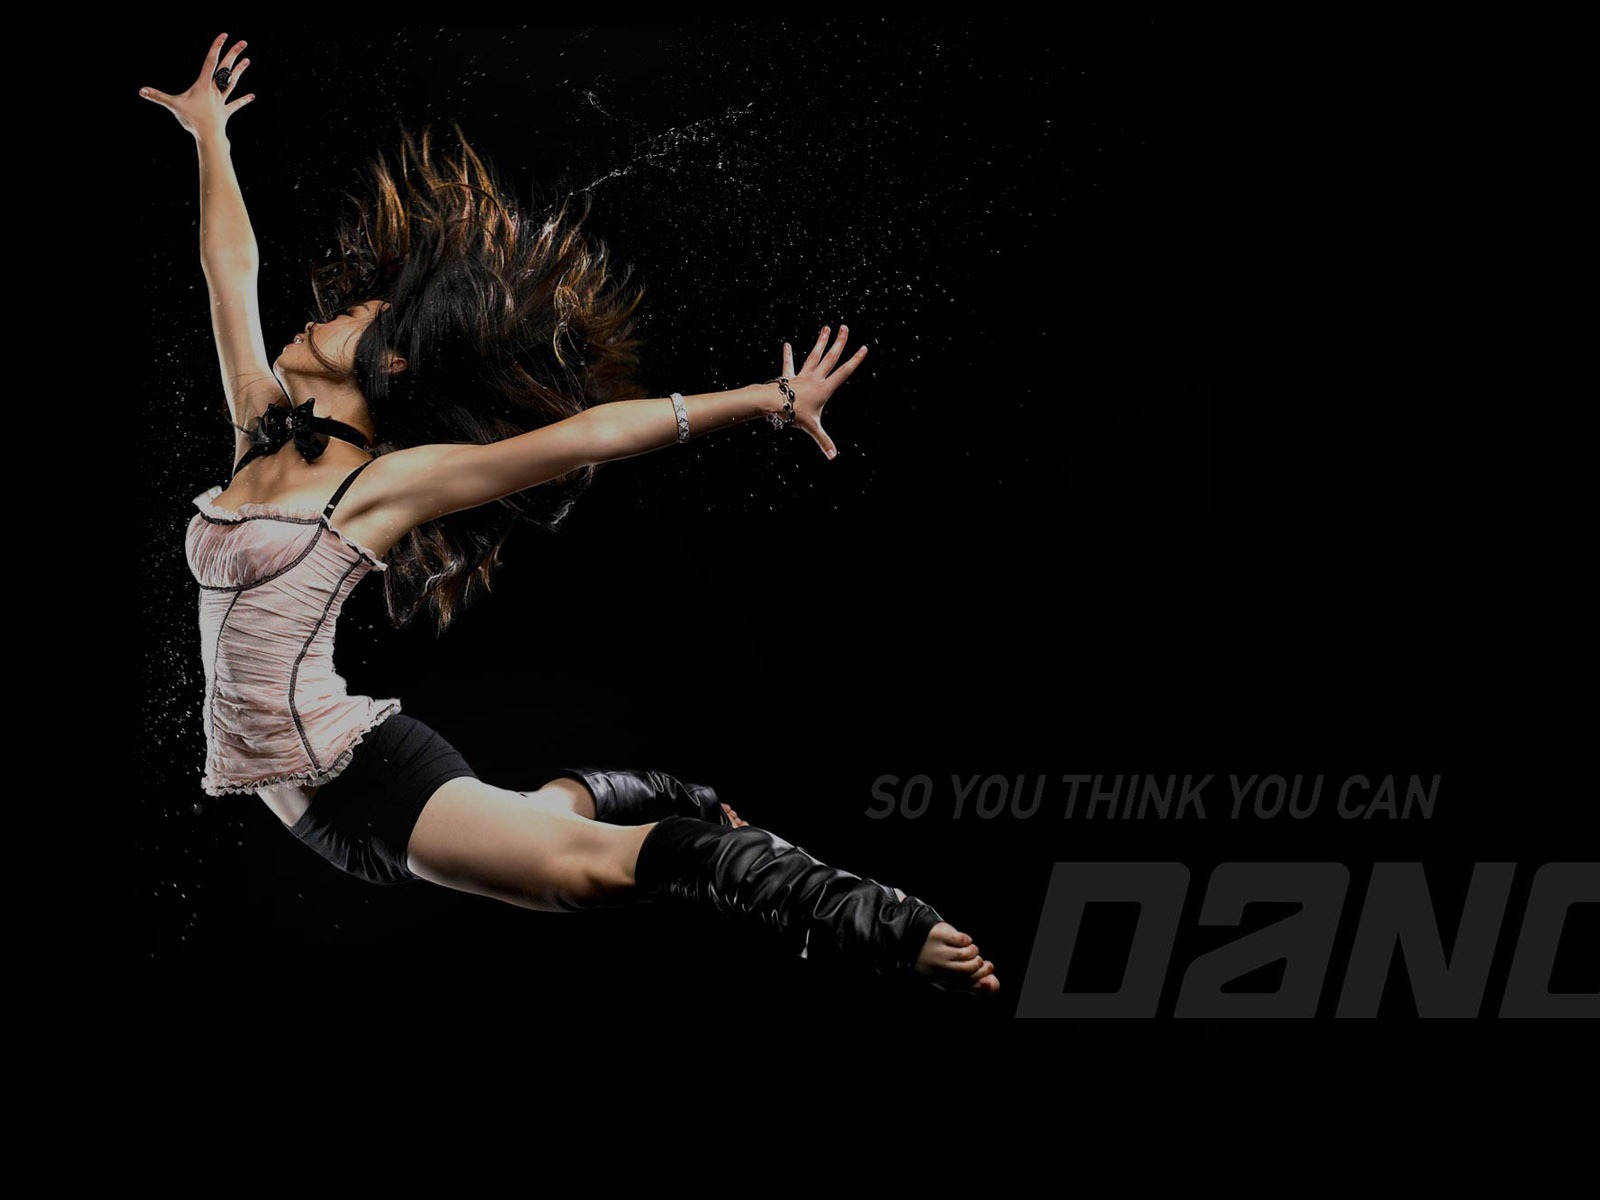 So You Think You Can Dance Wallpaper (1) #1 - 1600x1200